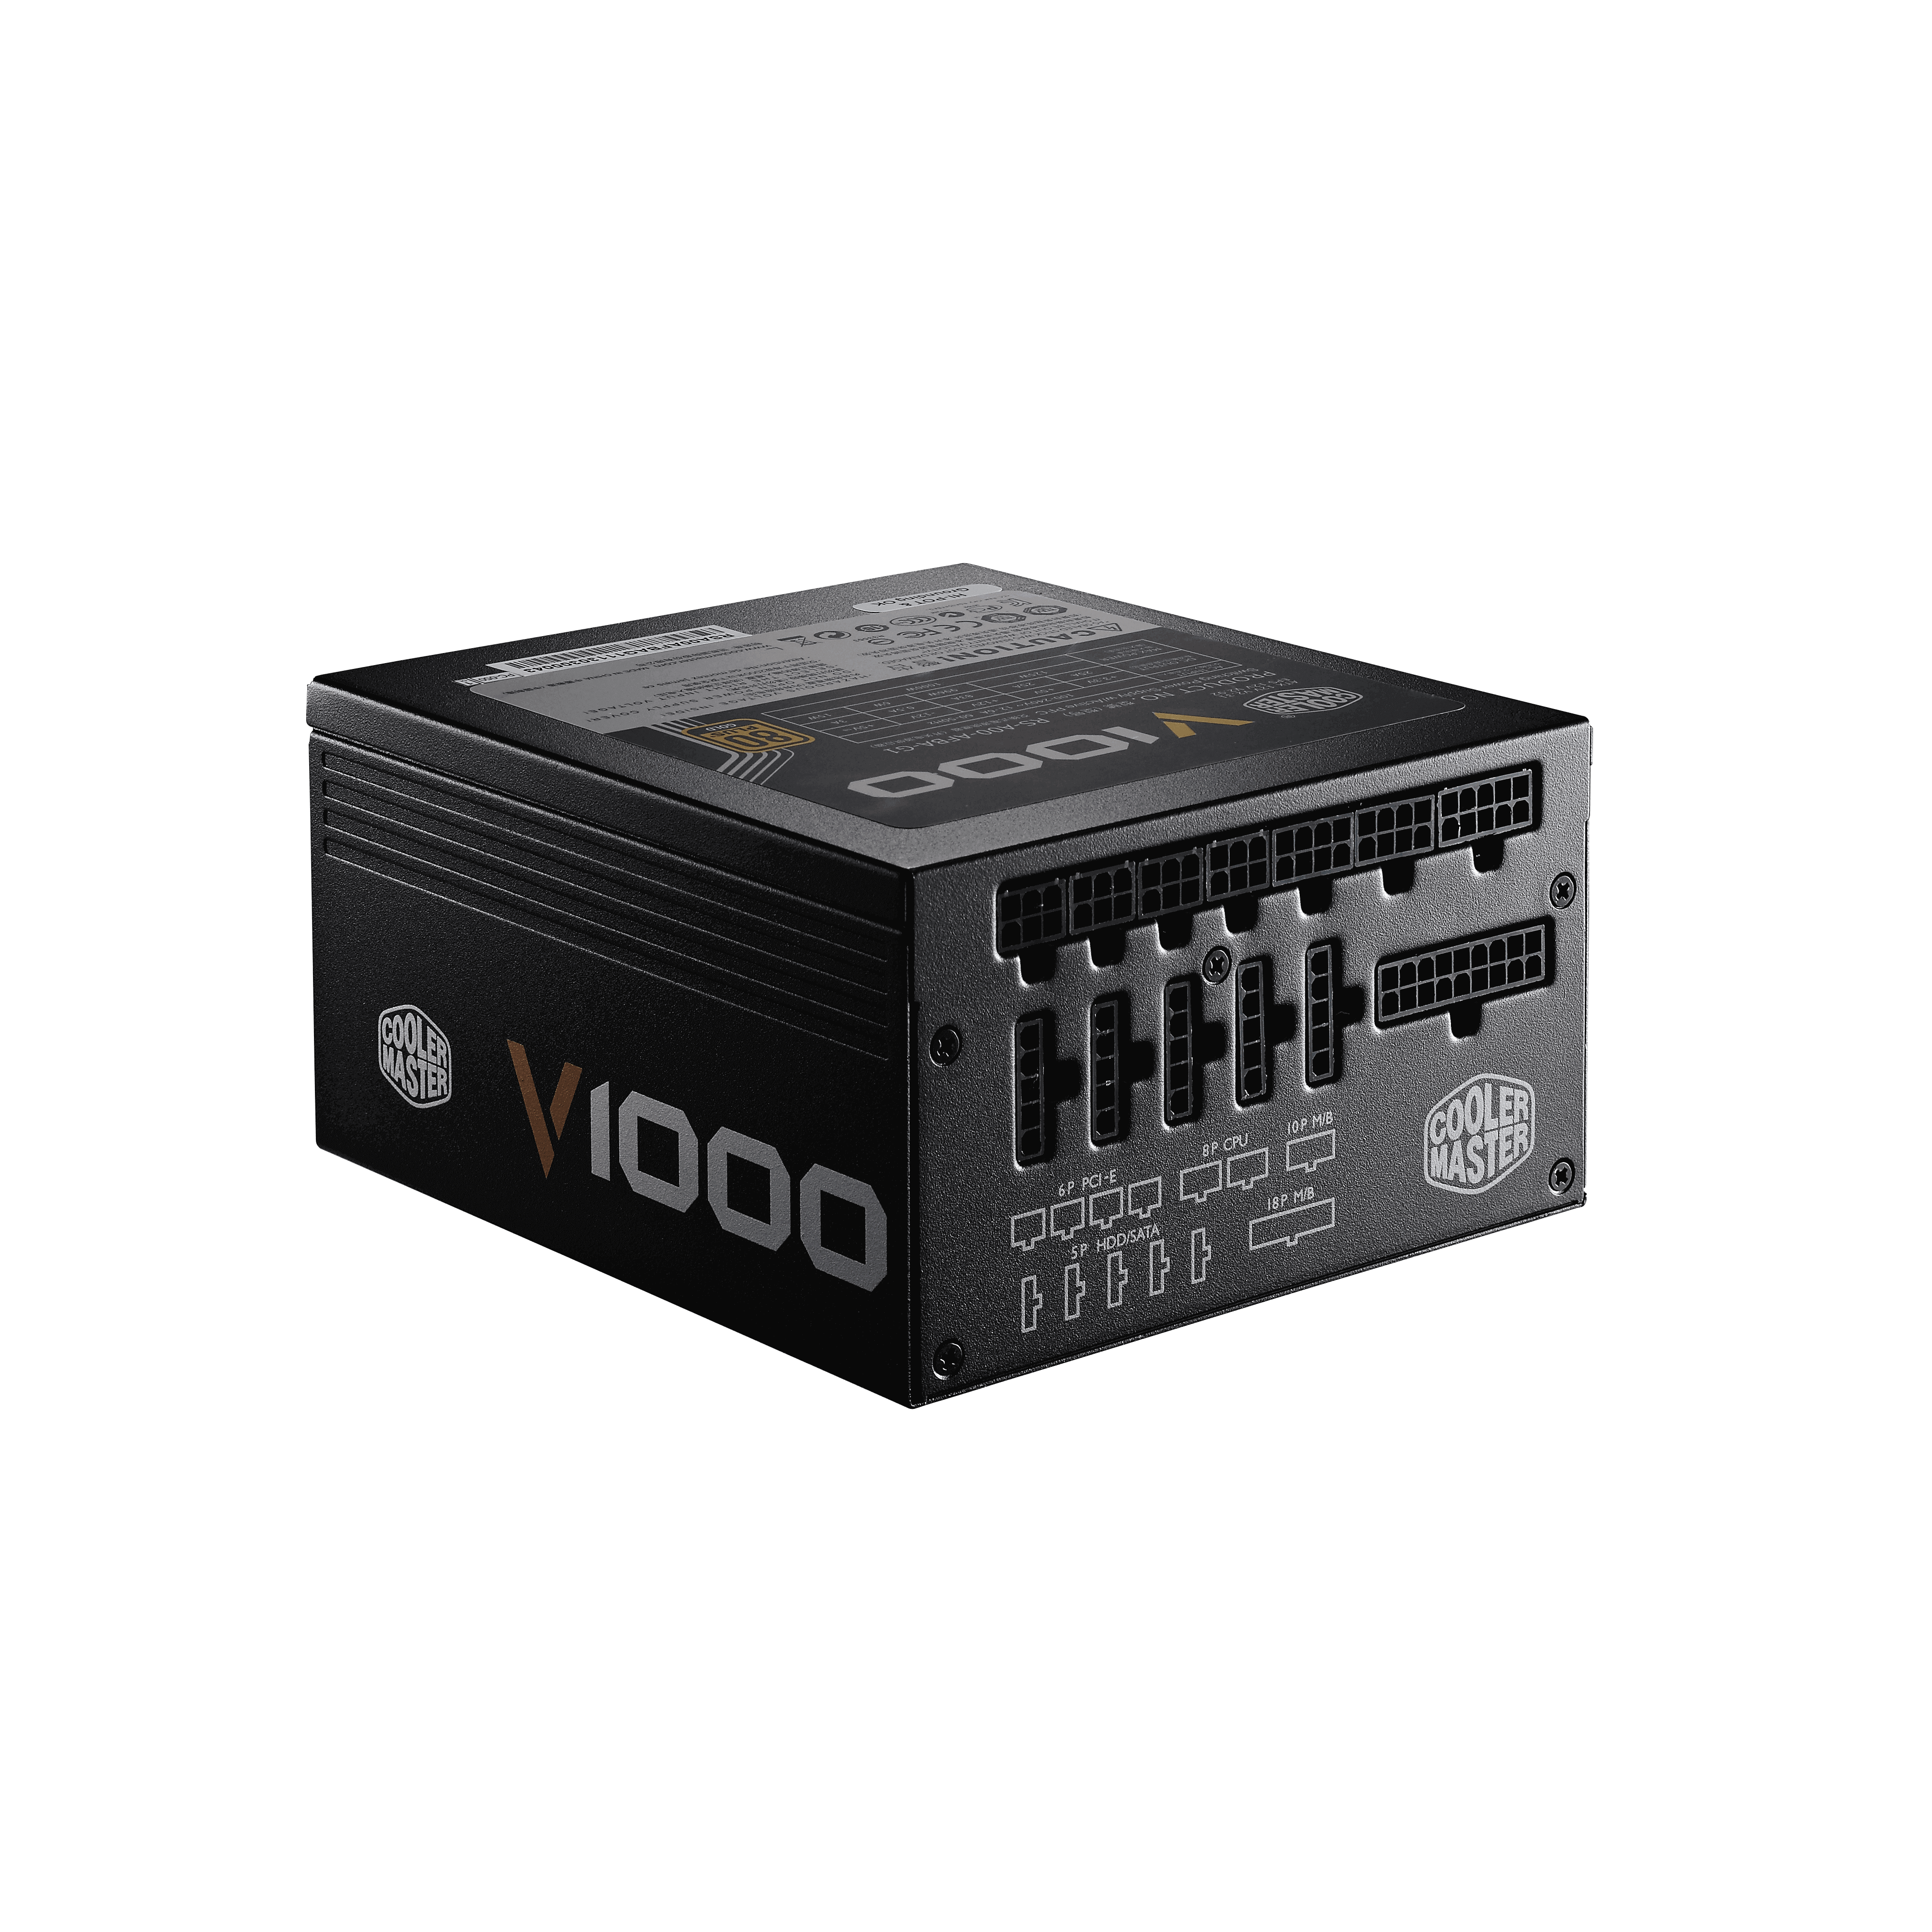 V1000 1000W Fully Modular 80 PLUS Gold Certified Power Supply 